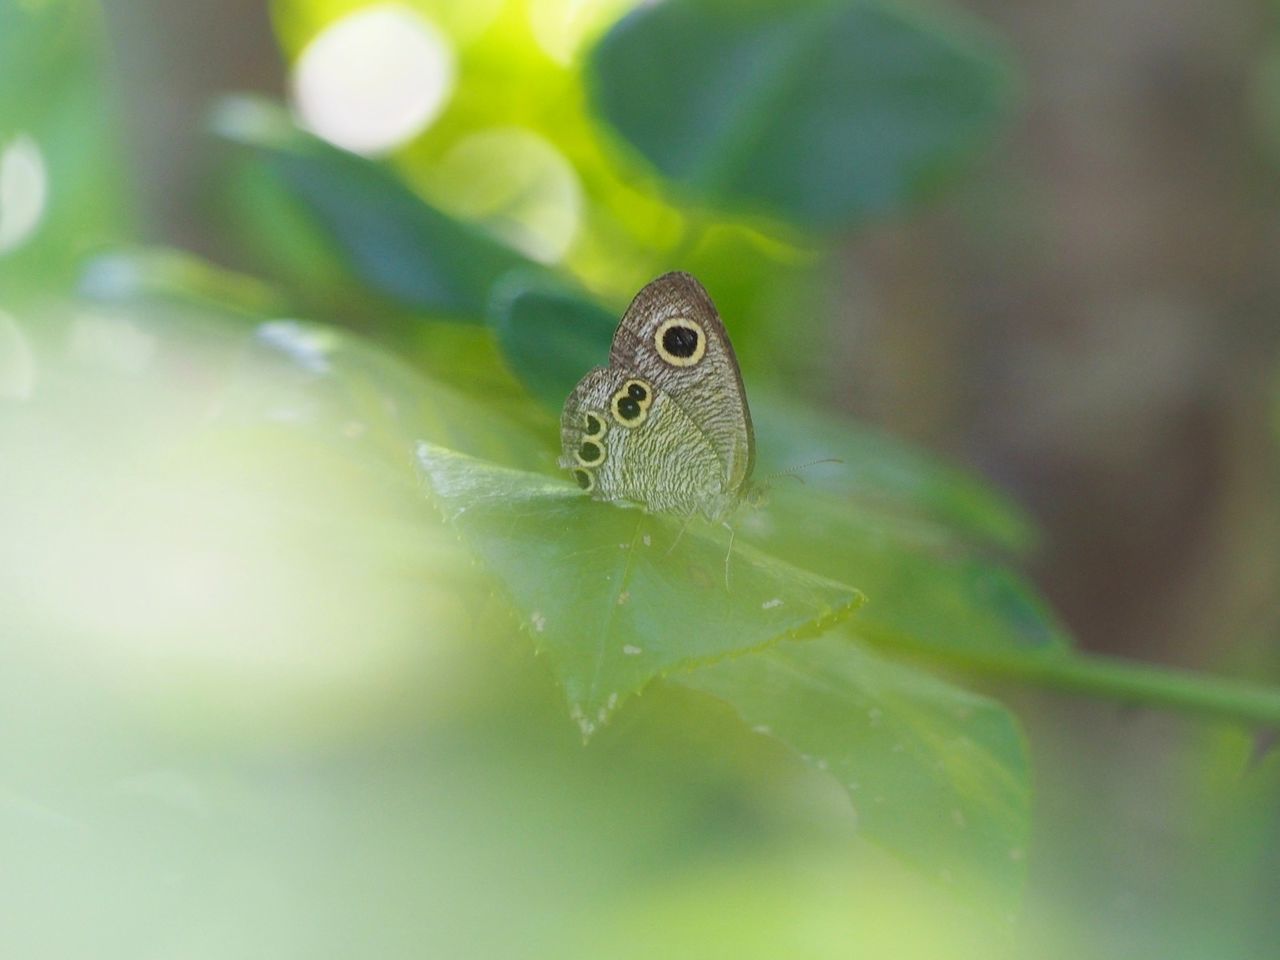 one animal, animal, animal themes, animal wildlife, animals in the wild, green color, close-up, plant part, leaf, day, nature, plant, no people, selective focus, vertebrate, focus on foreground, invertebrate, insect, growth, outdoors, animal eye